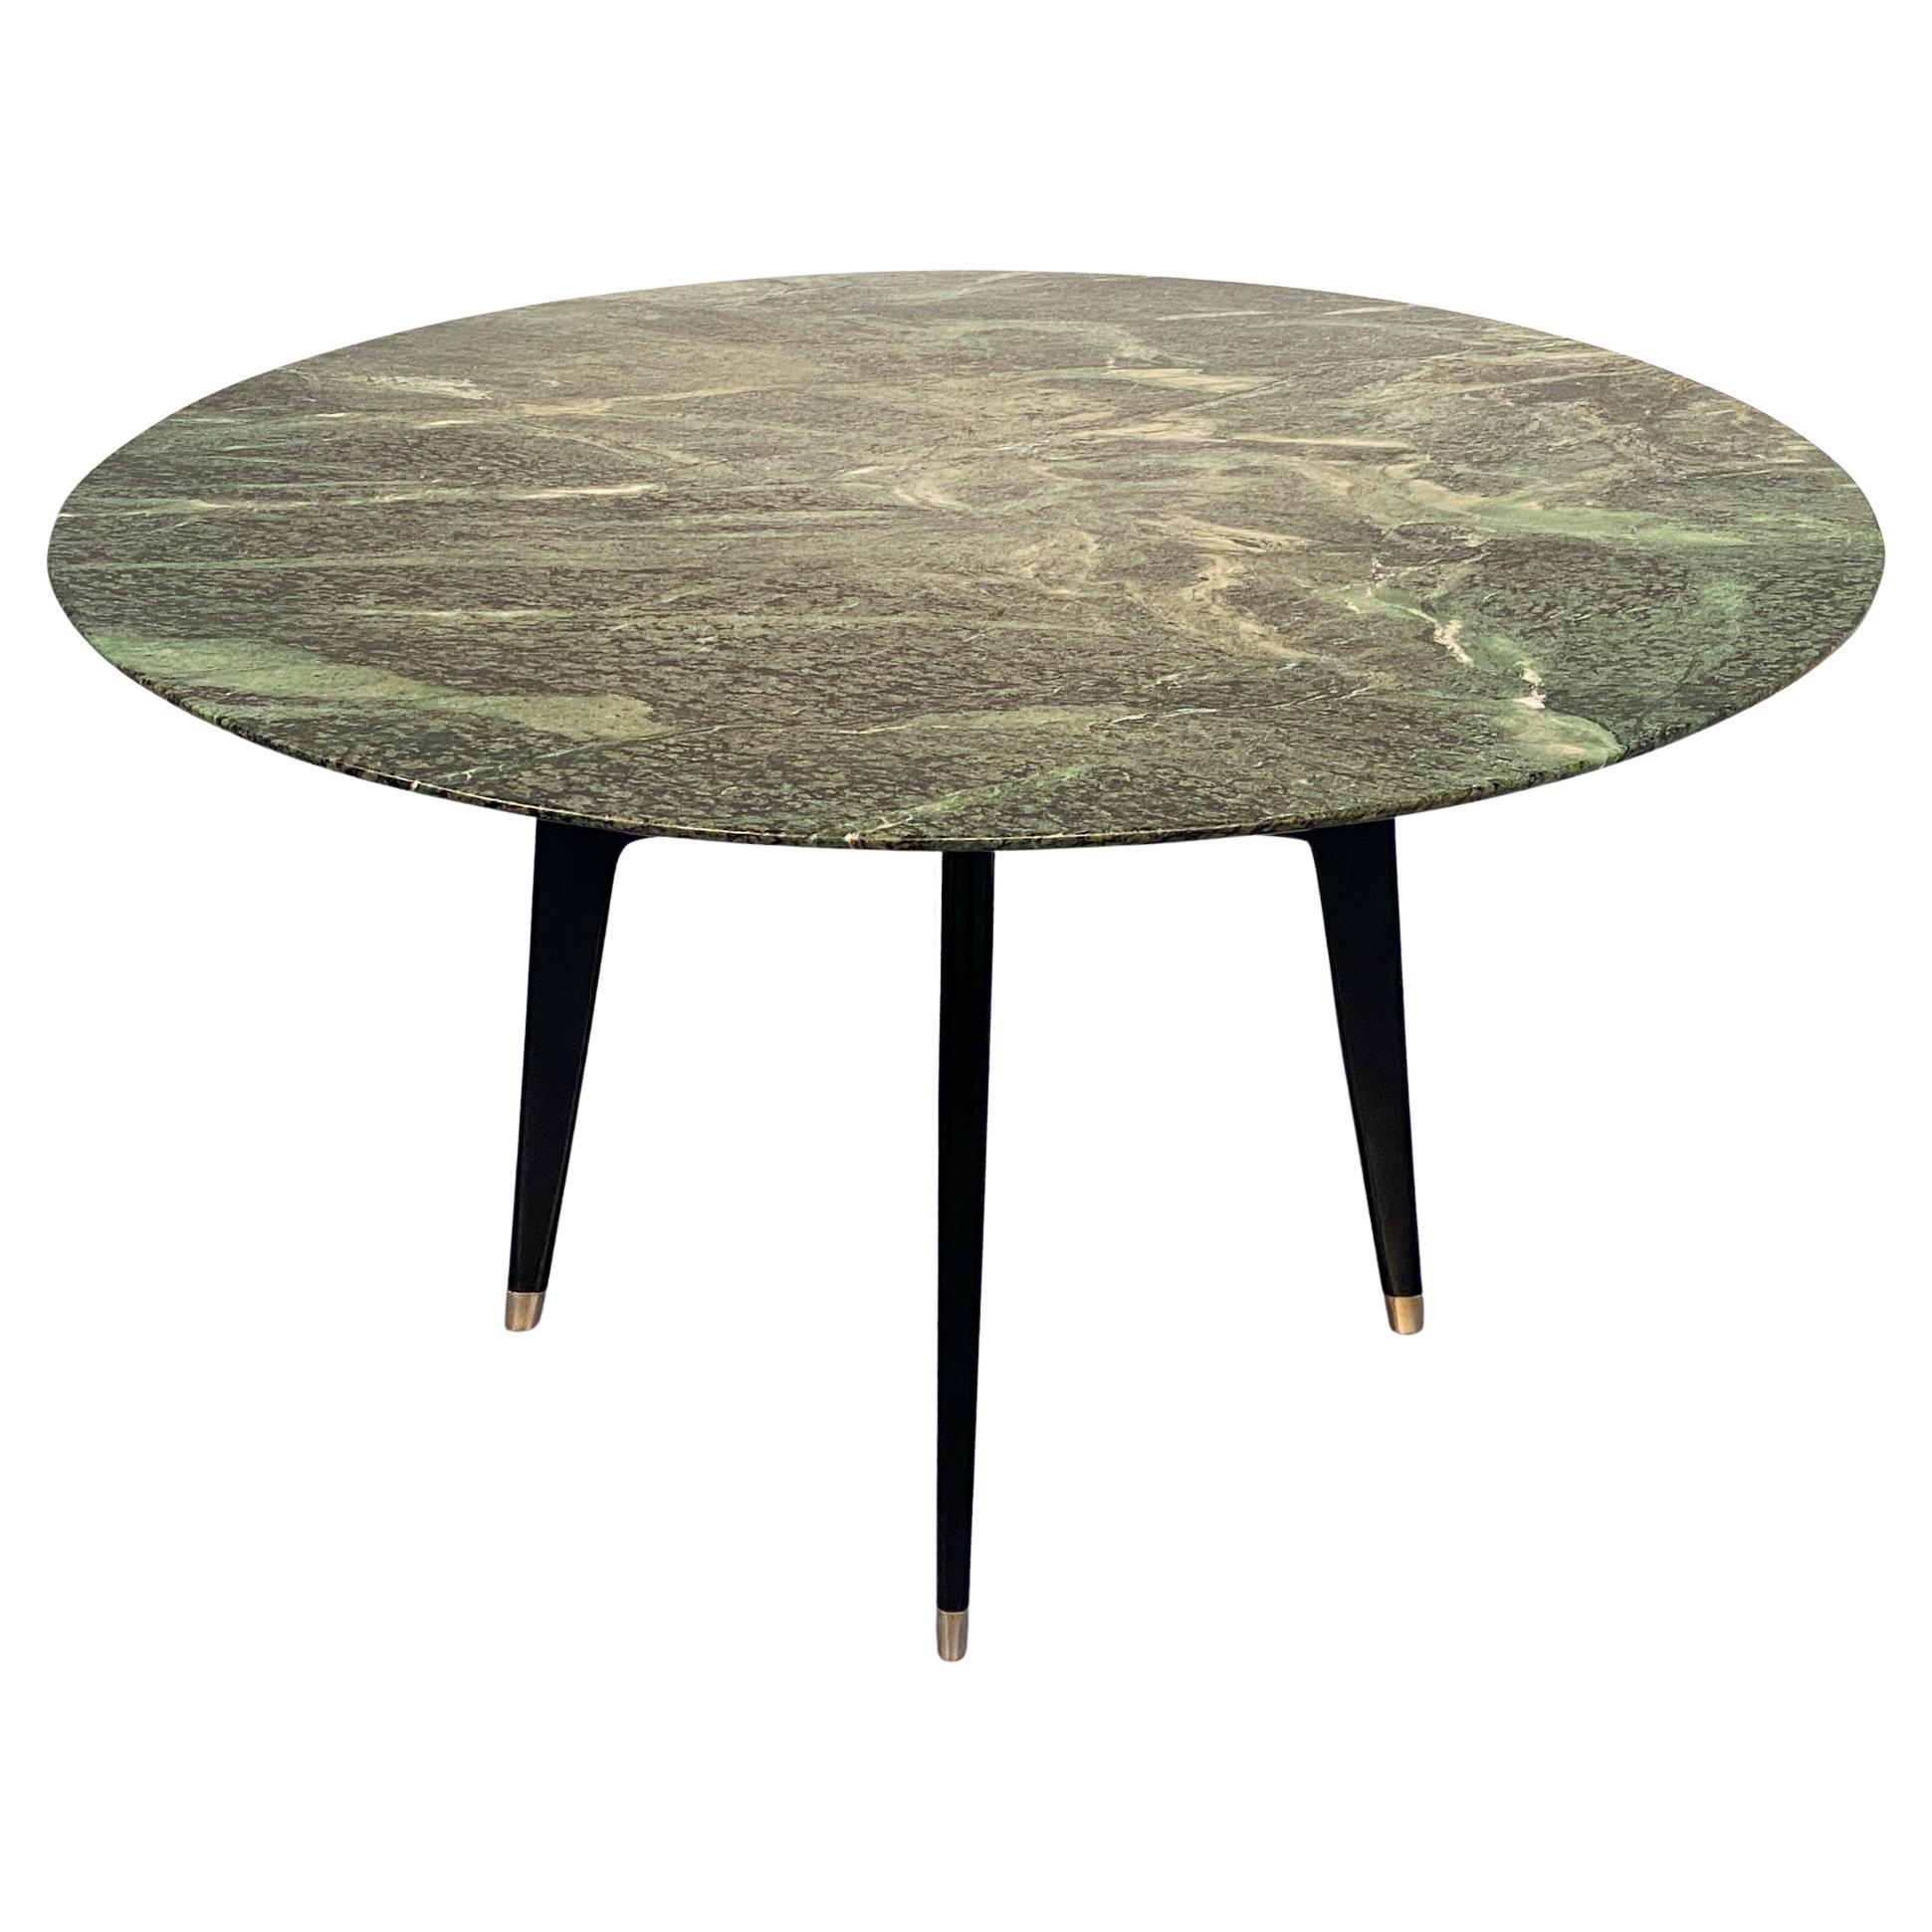 Italian Mid-Century  Marble Round Support or Center Table, by  Dassi 1950s